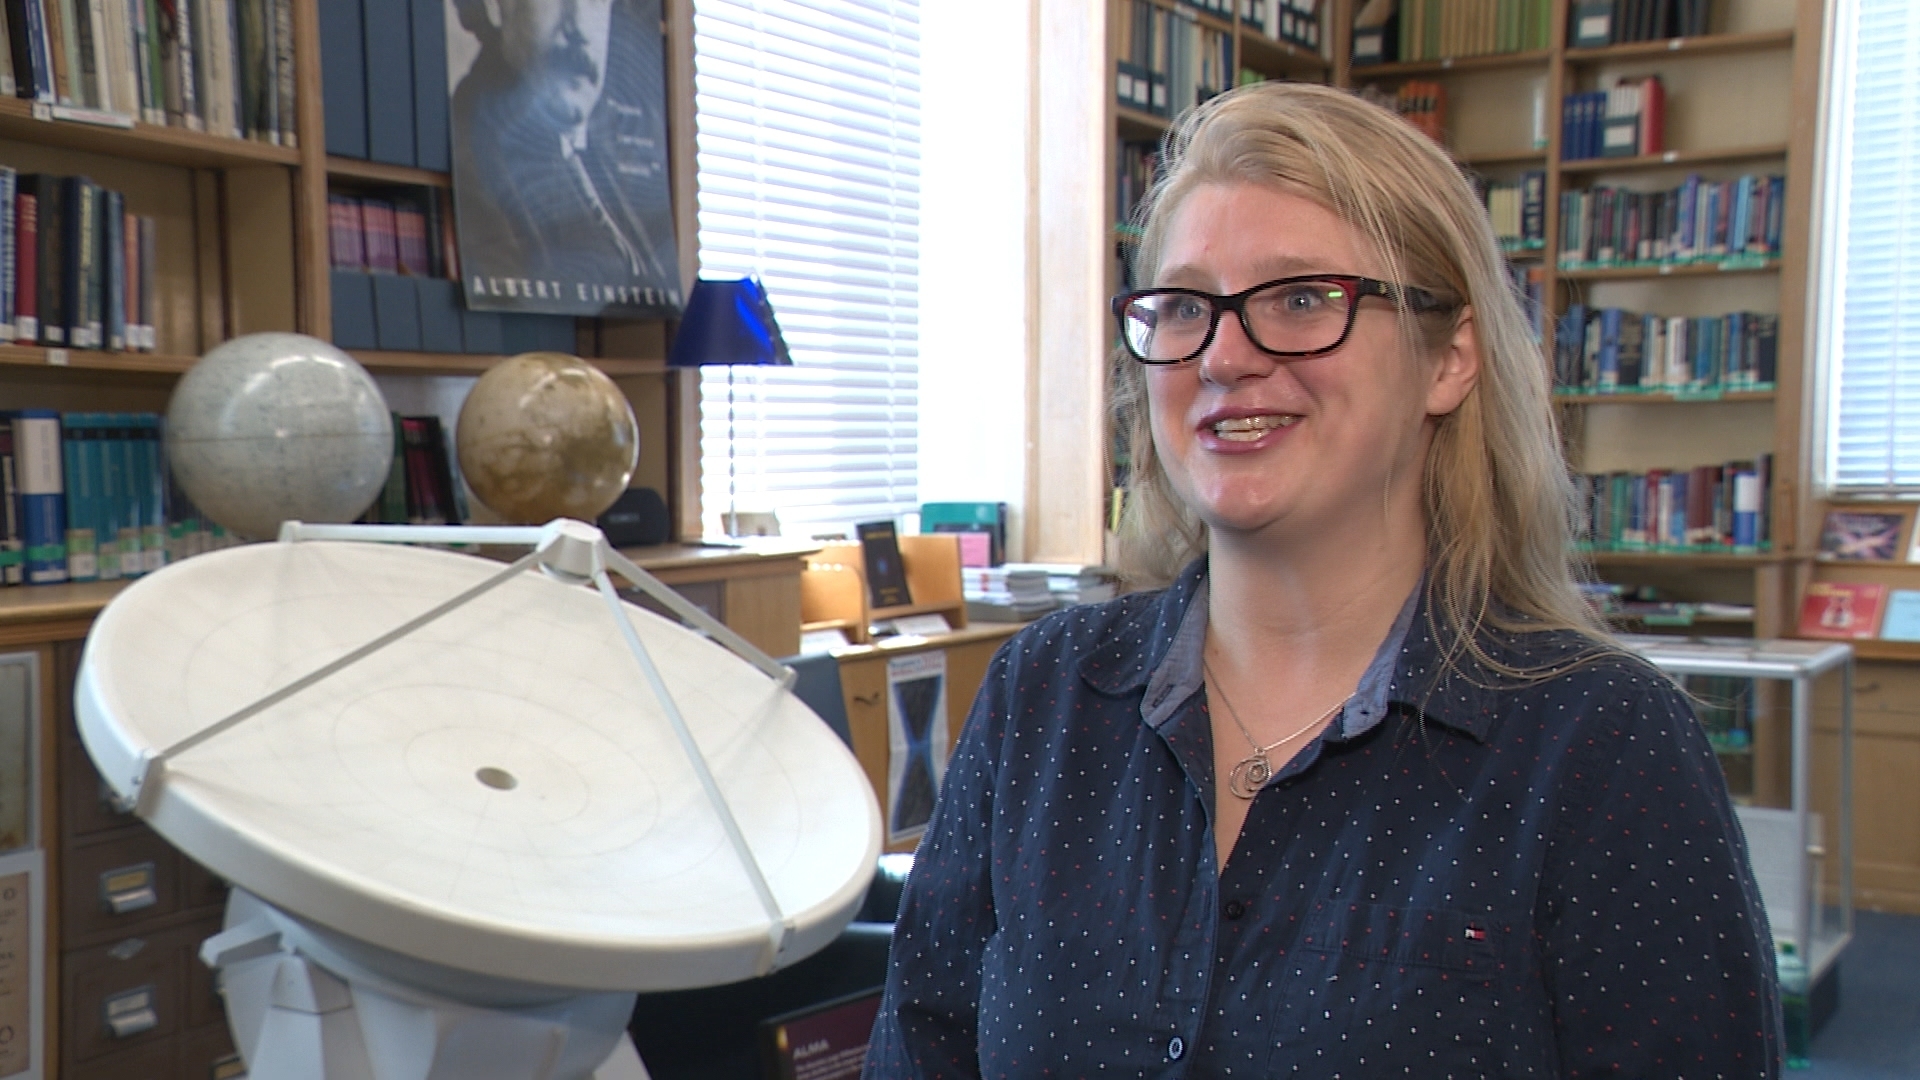 Dr Olivia Jones is a member of the team of scientists and engineers from the UK Astronomy Technology centre